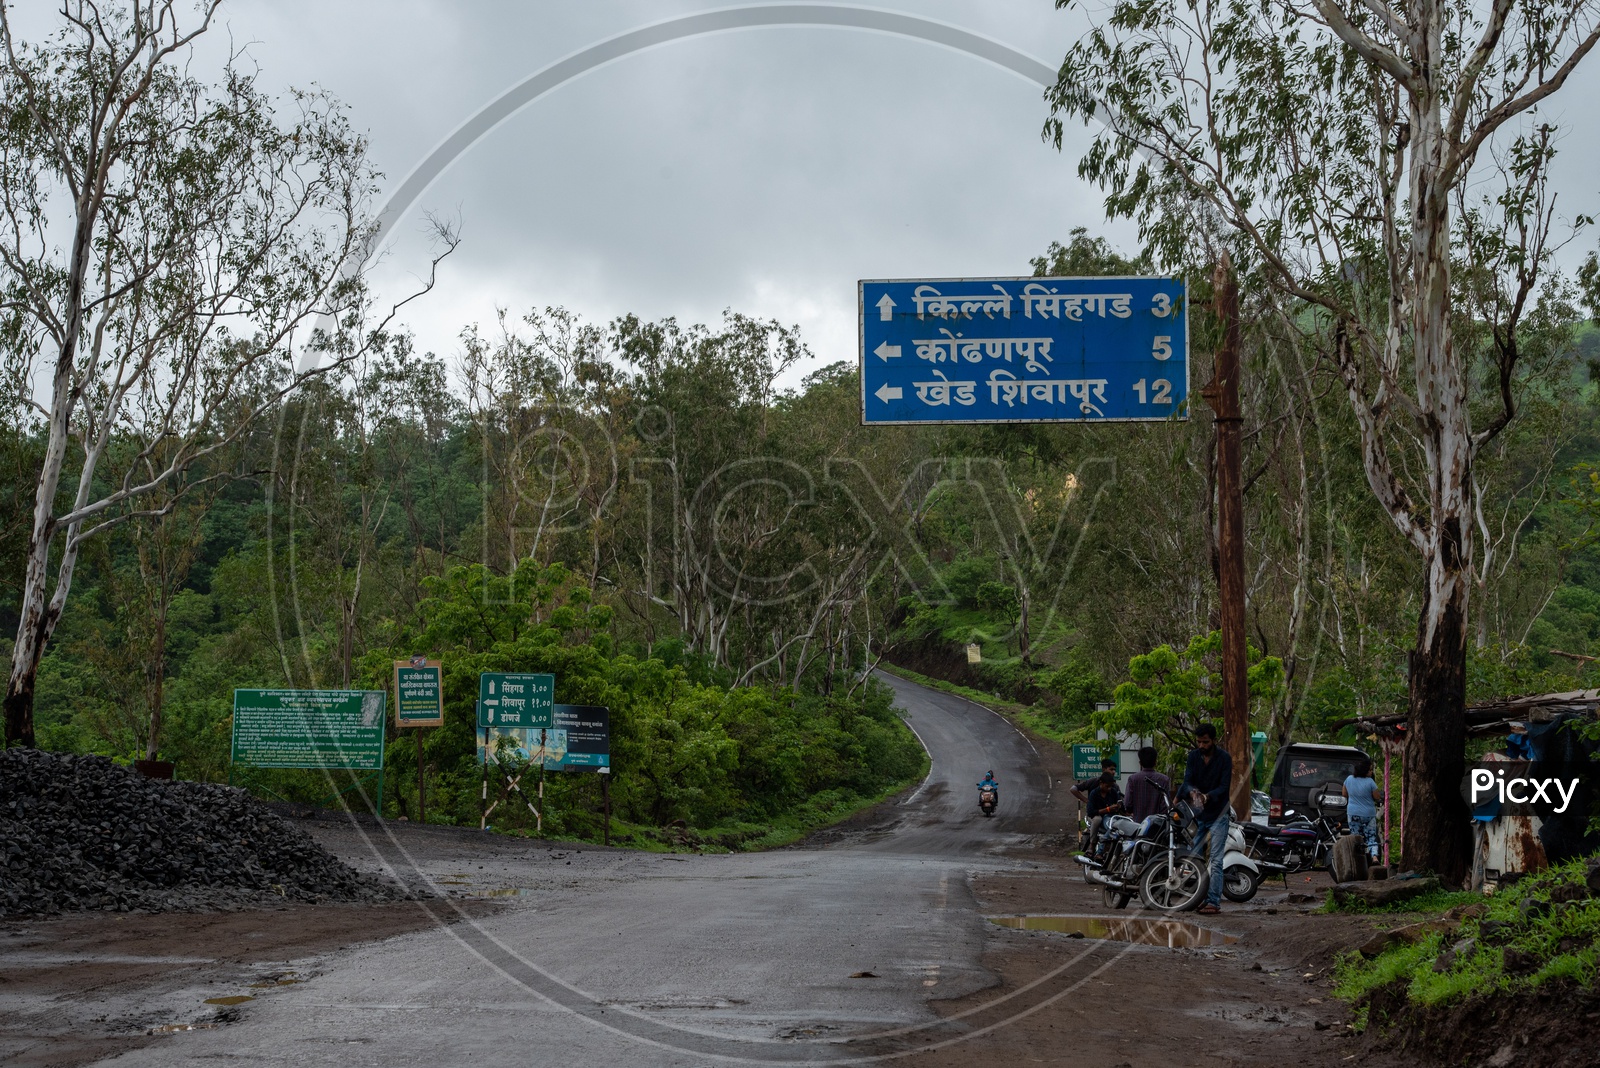 Enroute to Sinhagad Fort, Pune